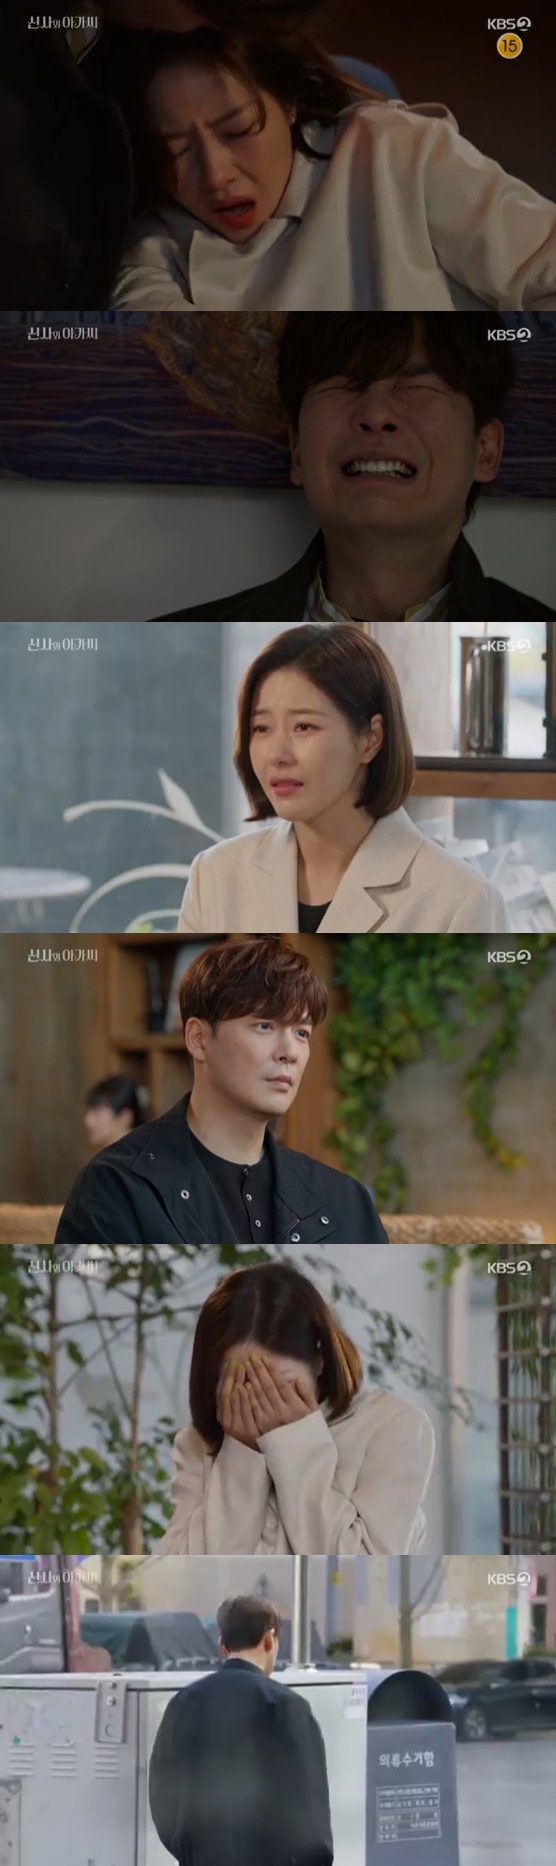 Seoul = = Park Ha-na split from Kang Eun-tak after miscarriing her fetus in an accident.In the 51st KBS 2TV weekend drama Shinto and Young Lady (directed by Shin Chang-seok and the play by Kim Sa-kyung), which was broadcast on the afternoon of the 26th, Kang Eun-tak took care of Jo Sa-ra (Park Ha-na), who is pregnant with her child.The investigation shook my mind when I saw the car that expressed my mind to myself.After that, Chagan told Josara to go to Vietnam and Lets go where no one knows and start again. I am confident that I am responsible for Mr. Sarah and Mr.The hesitant Josara told her, Its okay, I can start again, lets leave without telling anyone. Josara also decided to leave with Chasagan.But when I looked at the car that came home, I suddenly fell down the stairs and miscarried. After that, I met the car that was called I did bad things and dreamed of happiness with my uncle.So were punished. Were really here. Dont forgive me, really. Chagan said, I loved Sarah for the best. So I have no regrets.Im fine, he said, adding, I always want you to be healthy and happy. Eventually, the two broke up.On the other hand, Gentleman and young lady is a drama about the turbulent story that happens when gentleman and young lady meet to fulfill their responsibilities and happiness.It airs every Saturday and Sunday at 7:55 p.m.